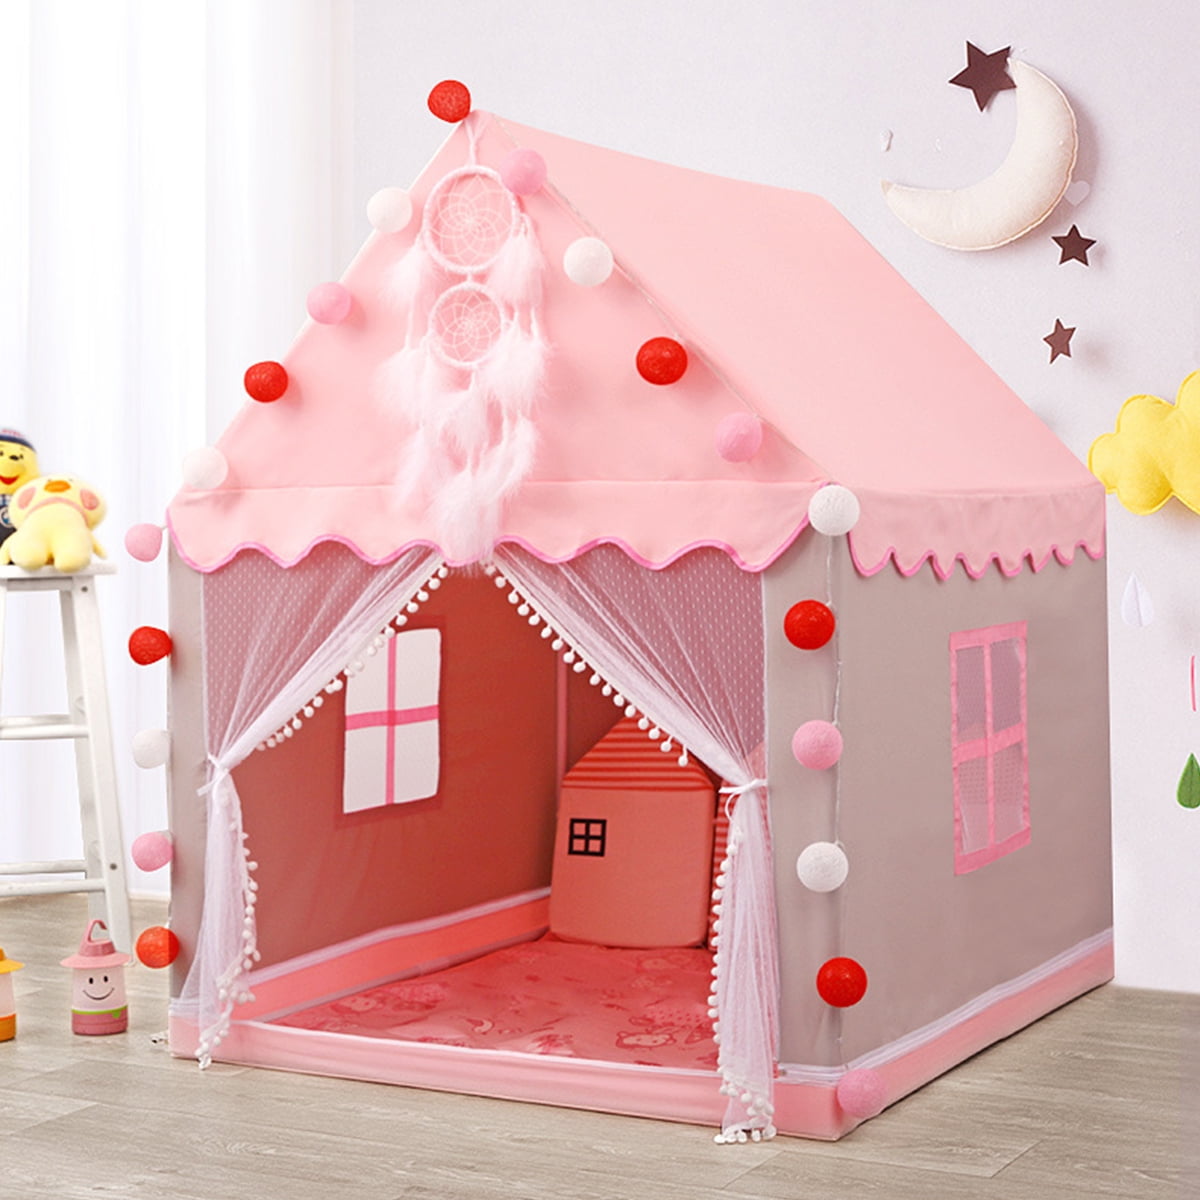 Playhouse for Kids Outdoor Indoor Plastic Toy Portable Castle Girl Boy House 